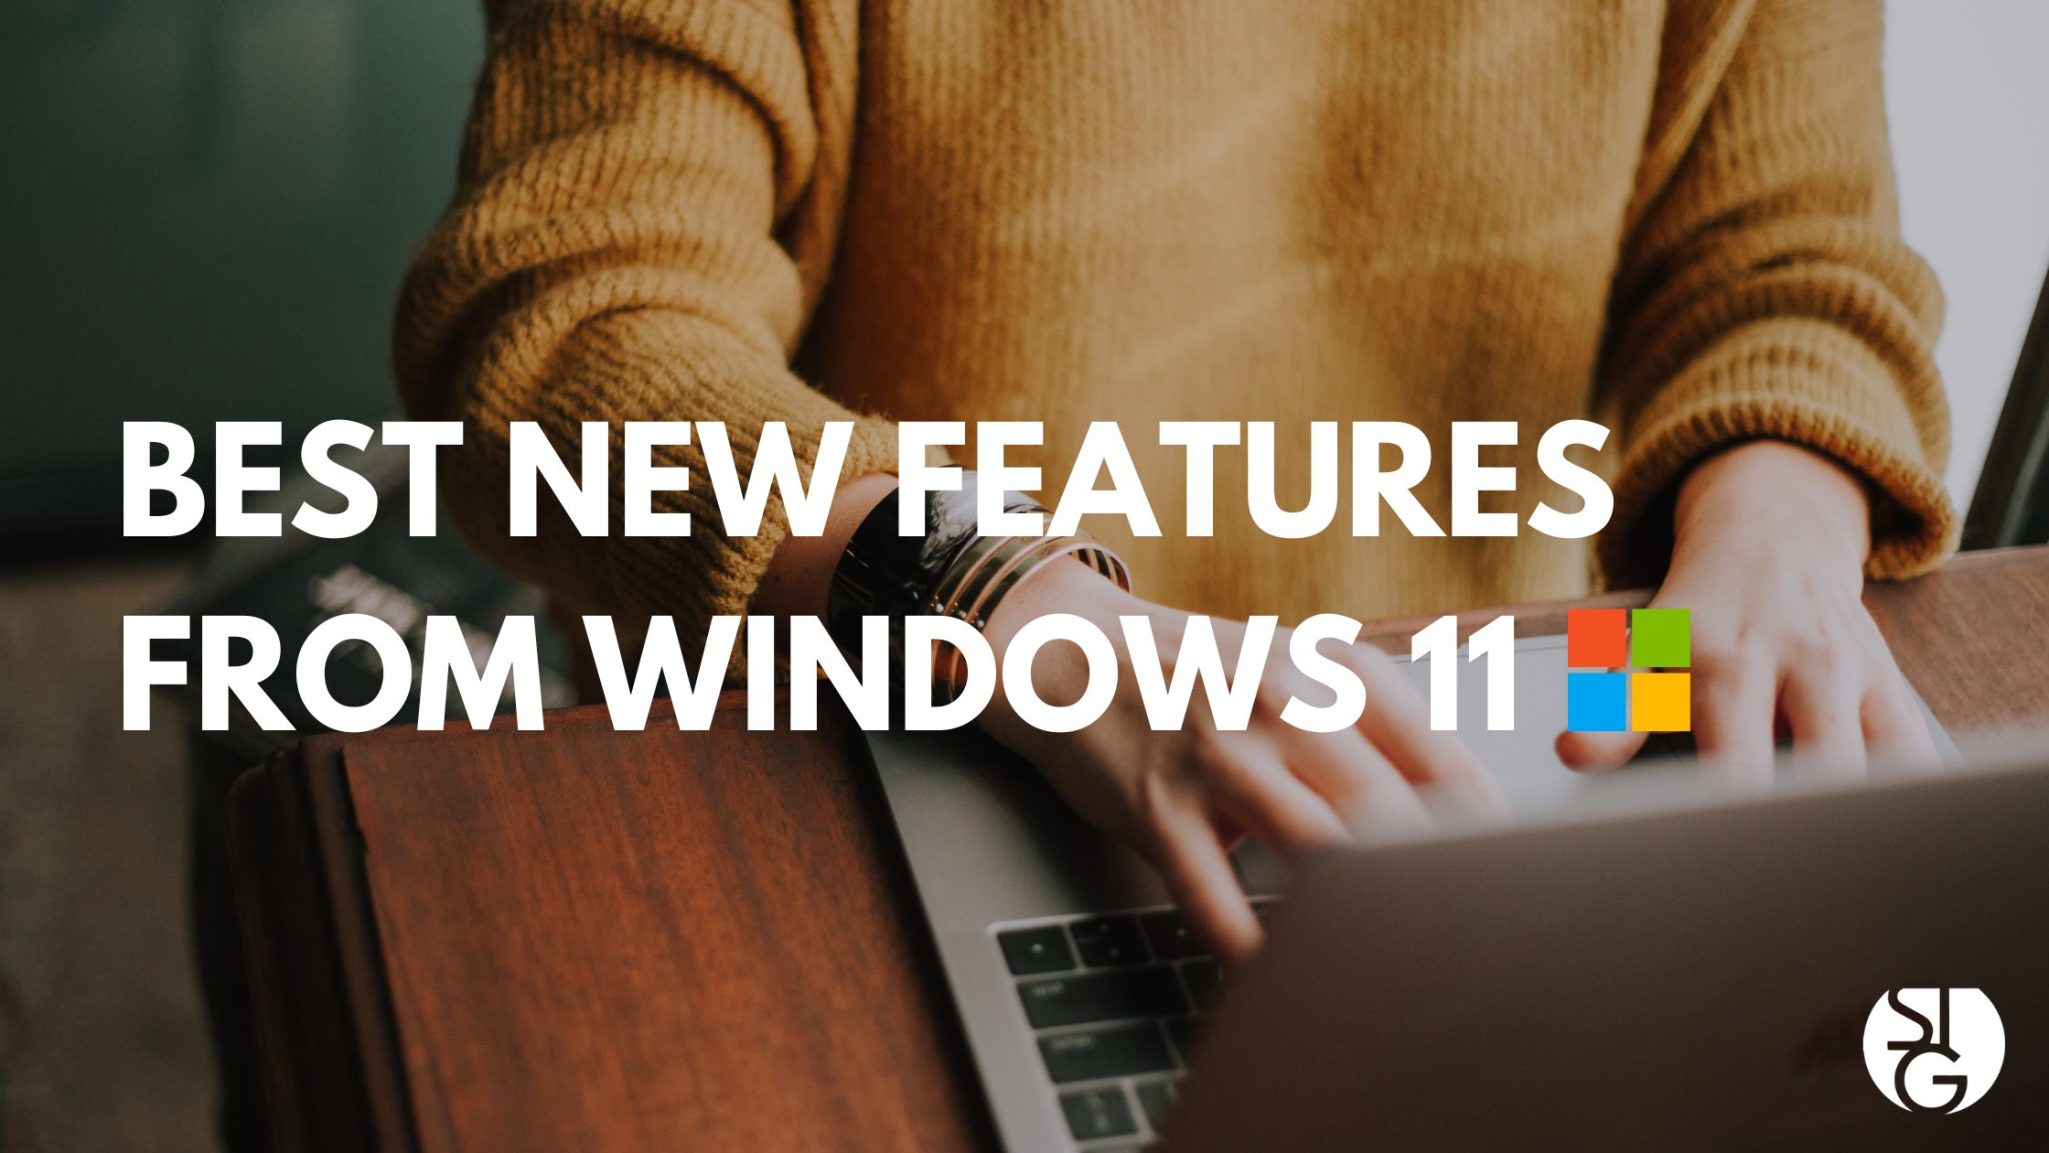 Best New Features From Windows 11